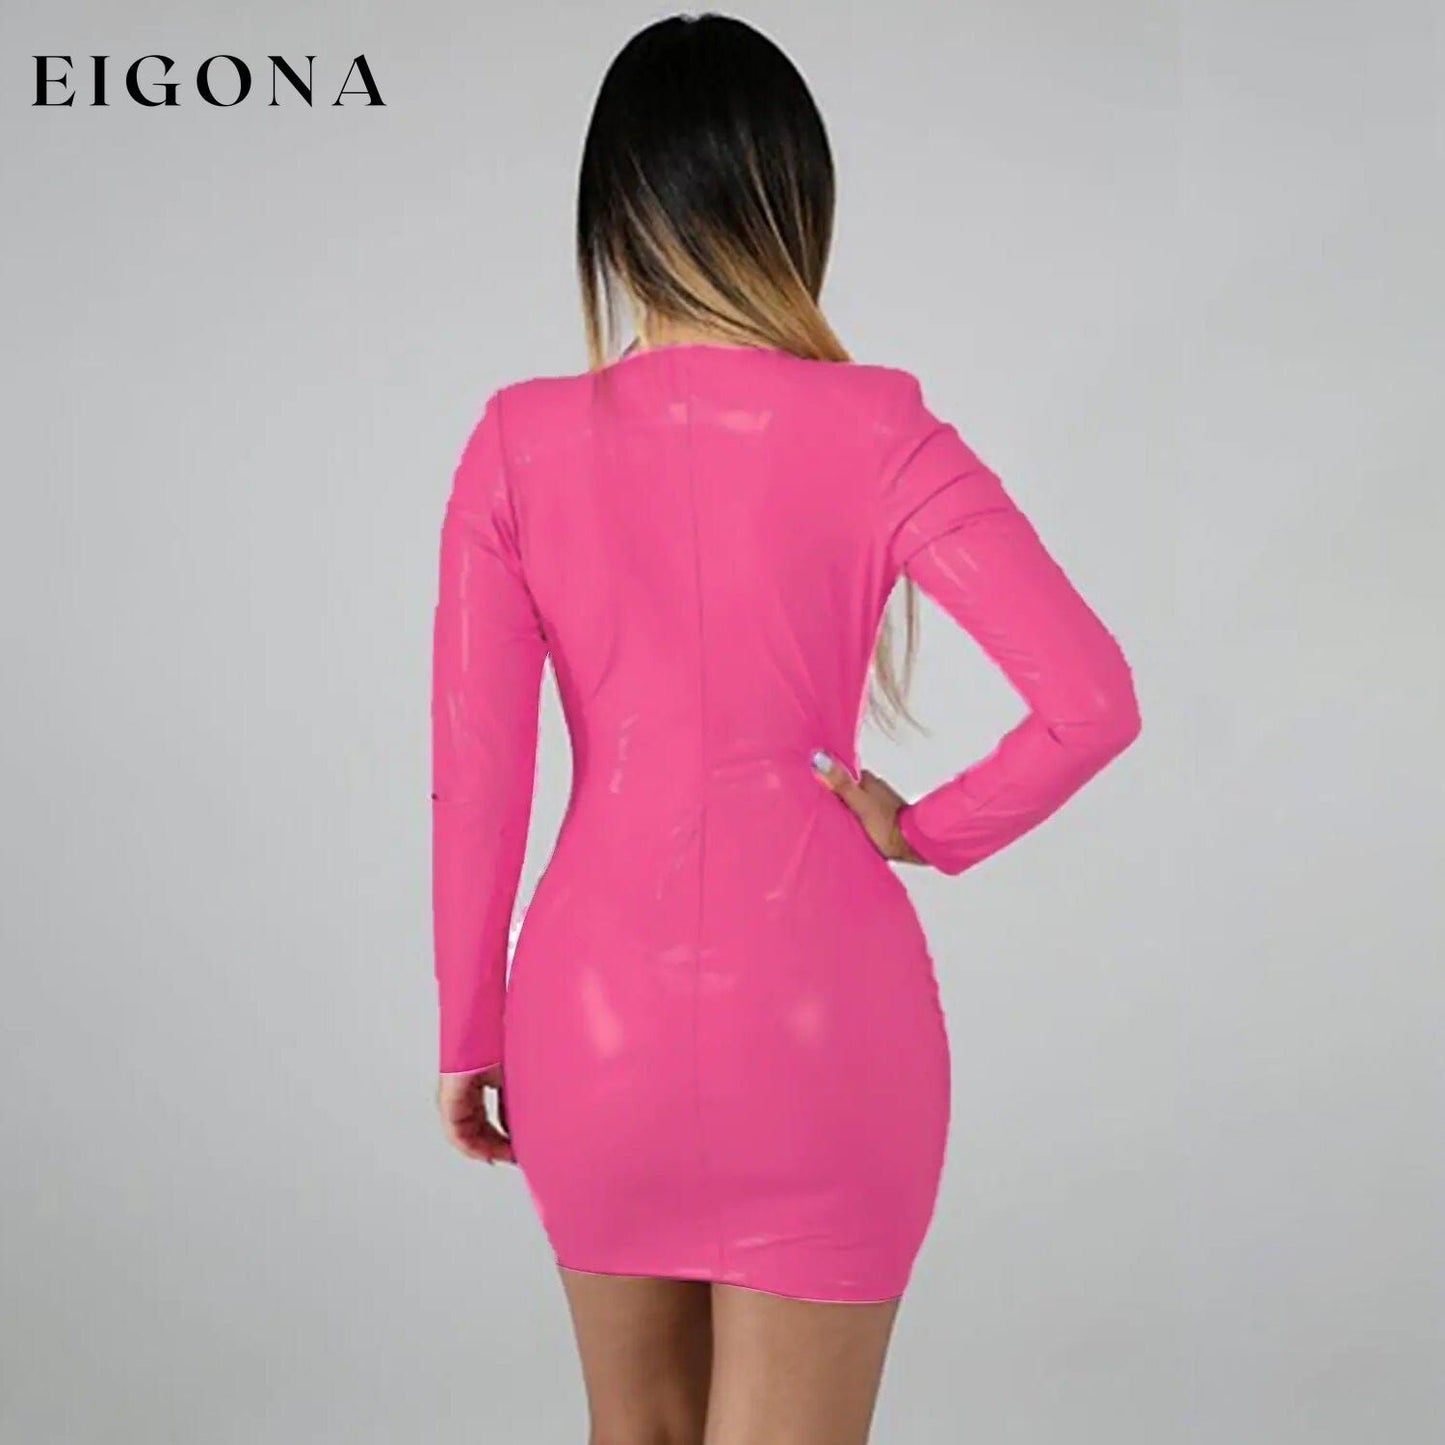 Women's Party Bodycon Long Sleeve Mini Dress __stock:200 casual dresses clothes dresses refund_fee:1200